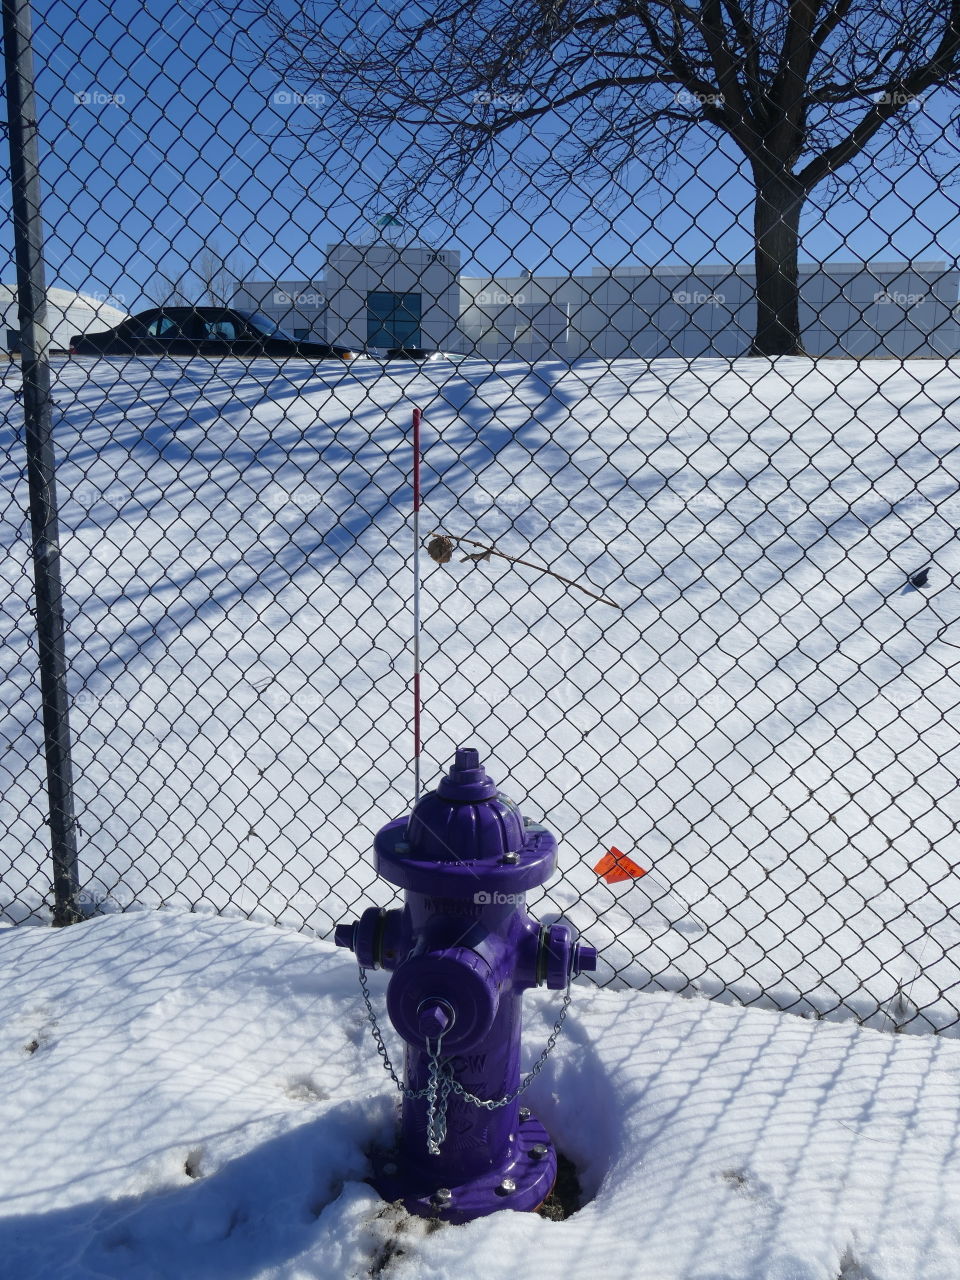 The purple fire hydrant outside Paisley Park.